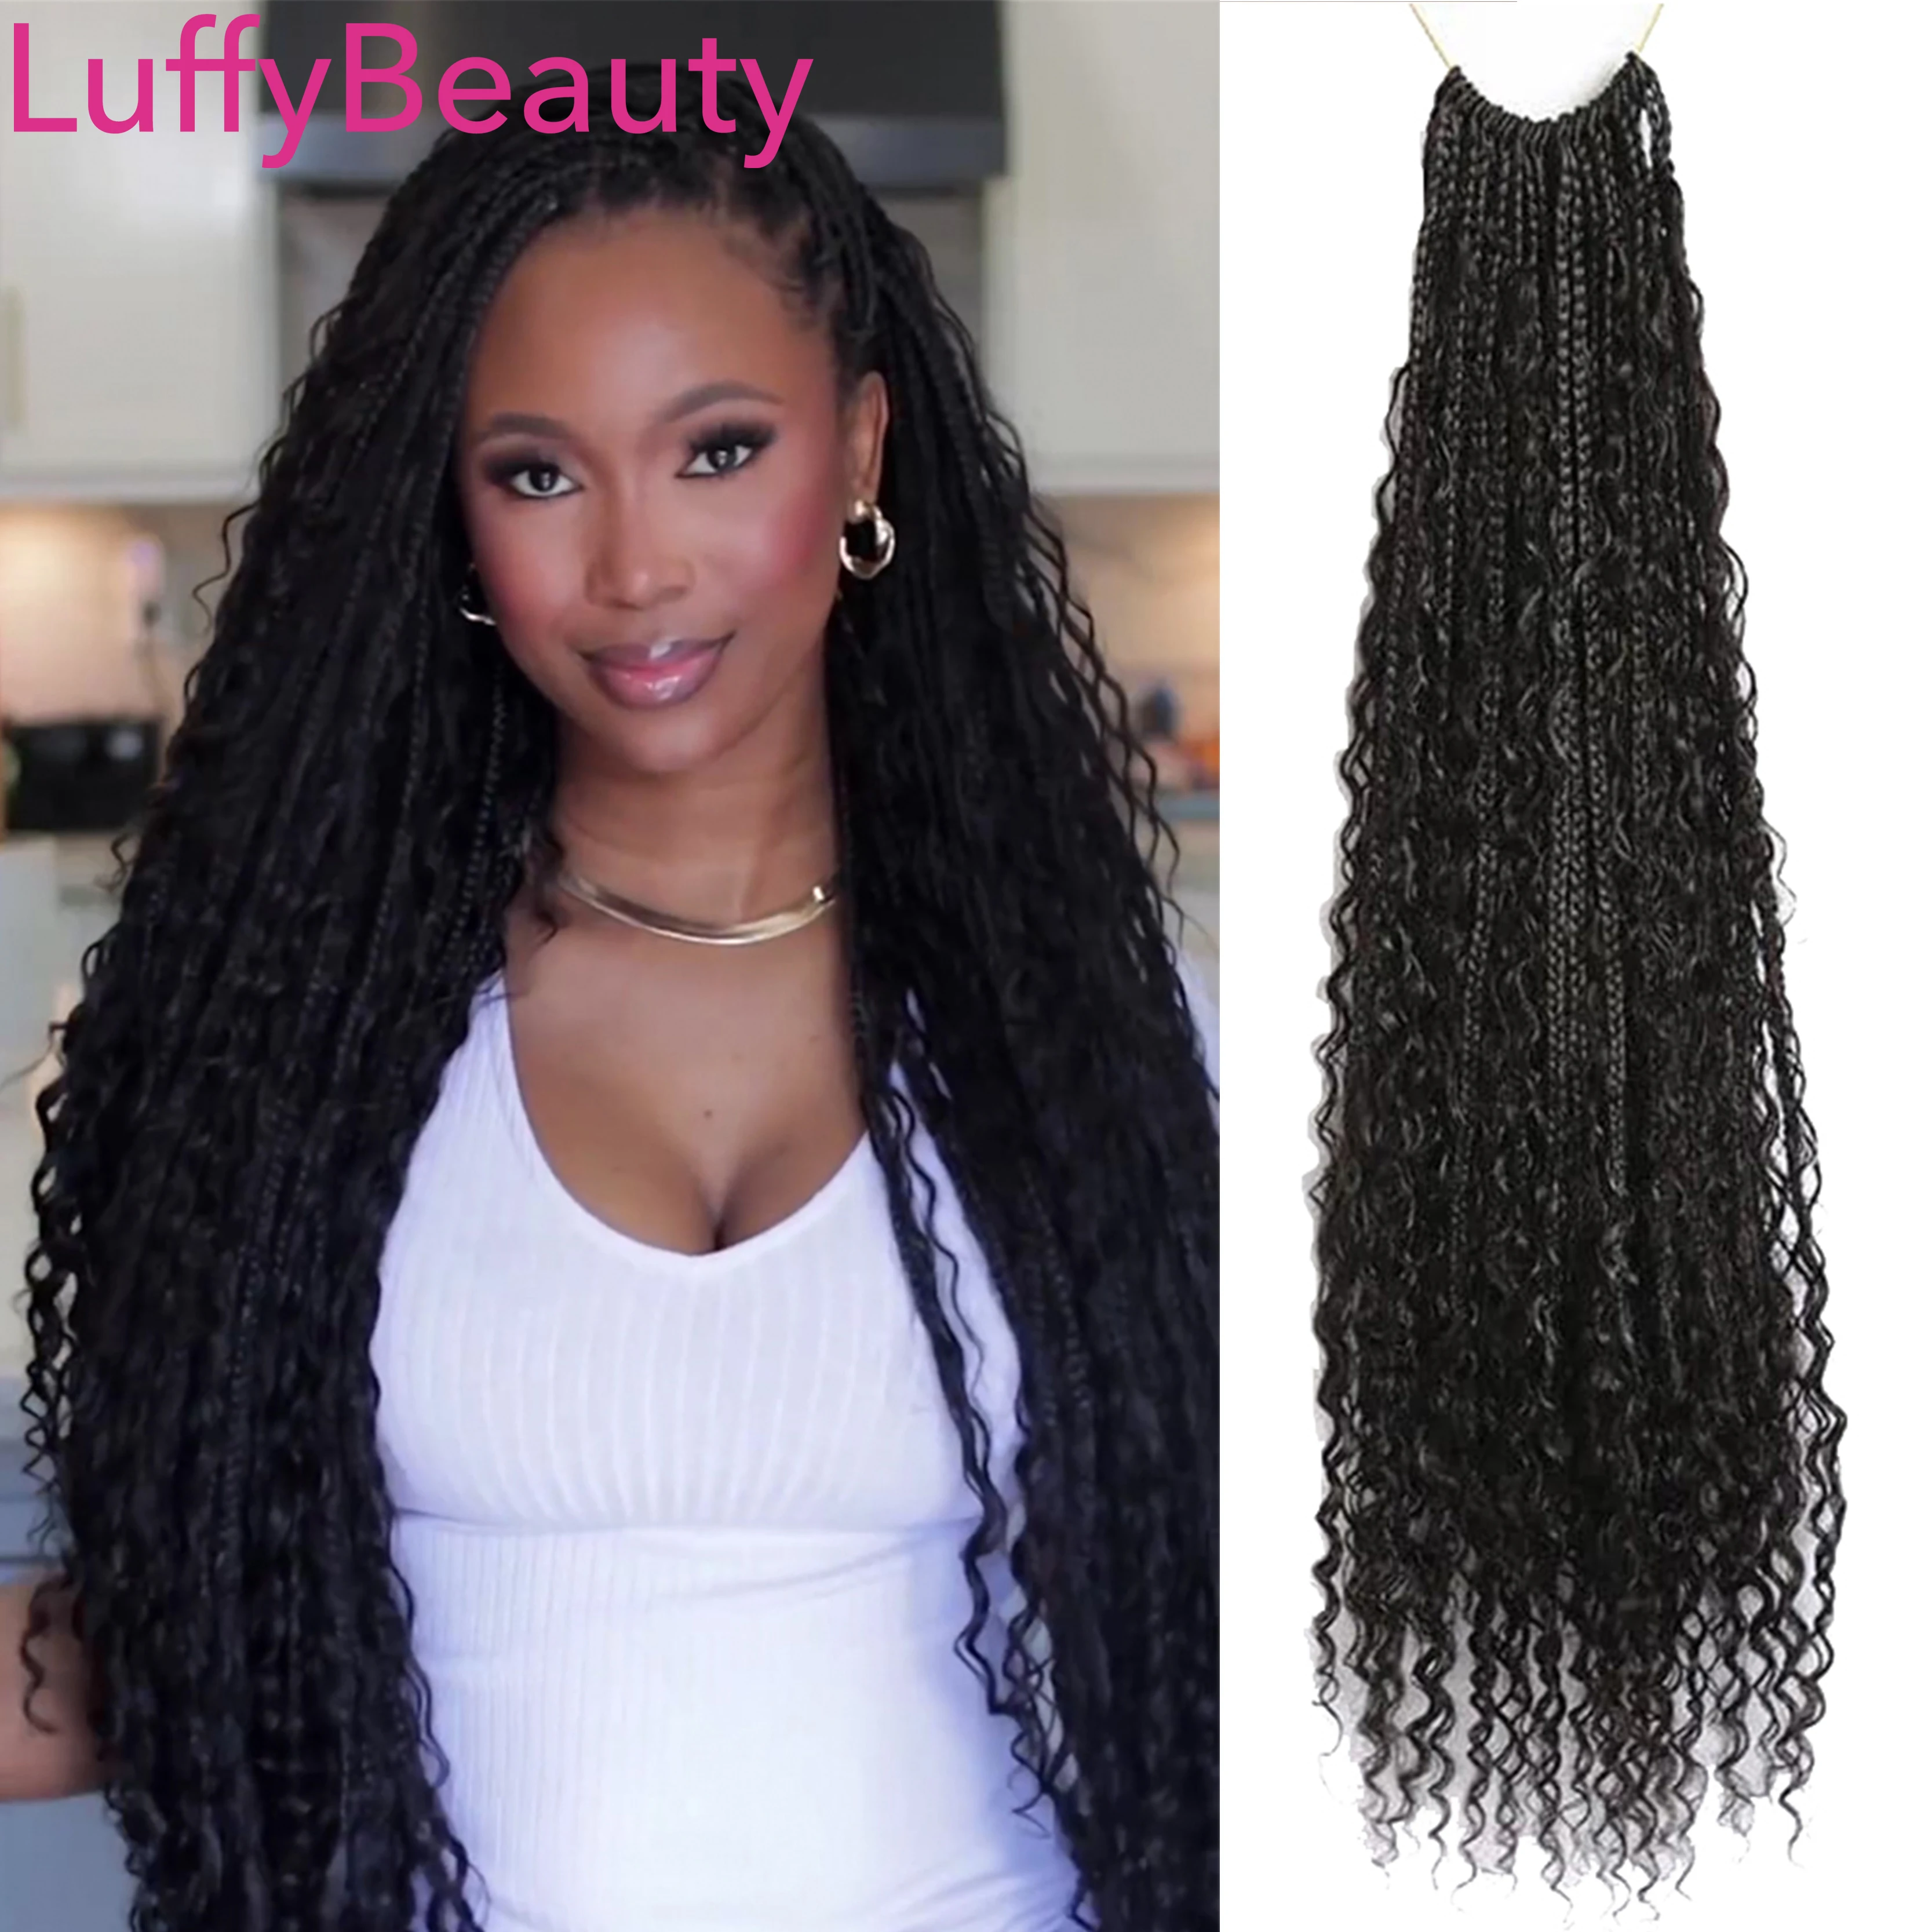 

Human Hair Crochet Boho Box Braids With Human Curls Pre-looped Synthetic Braid With Curls Full Ends 14-30inches LuffyBeauty